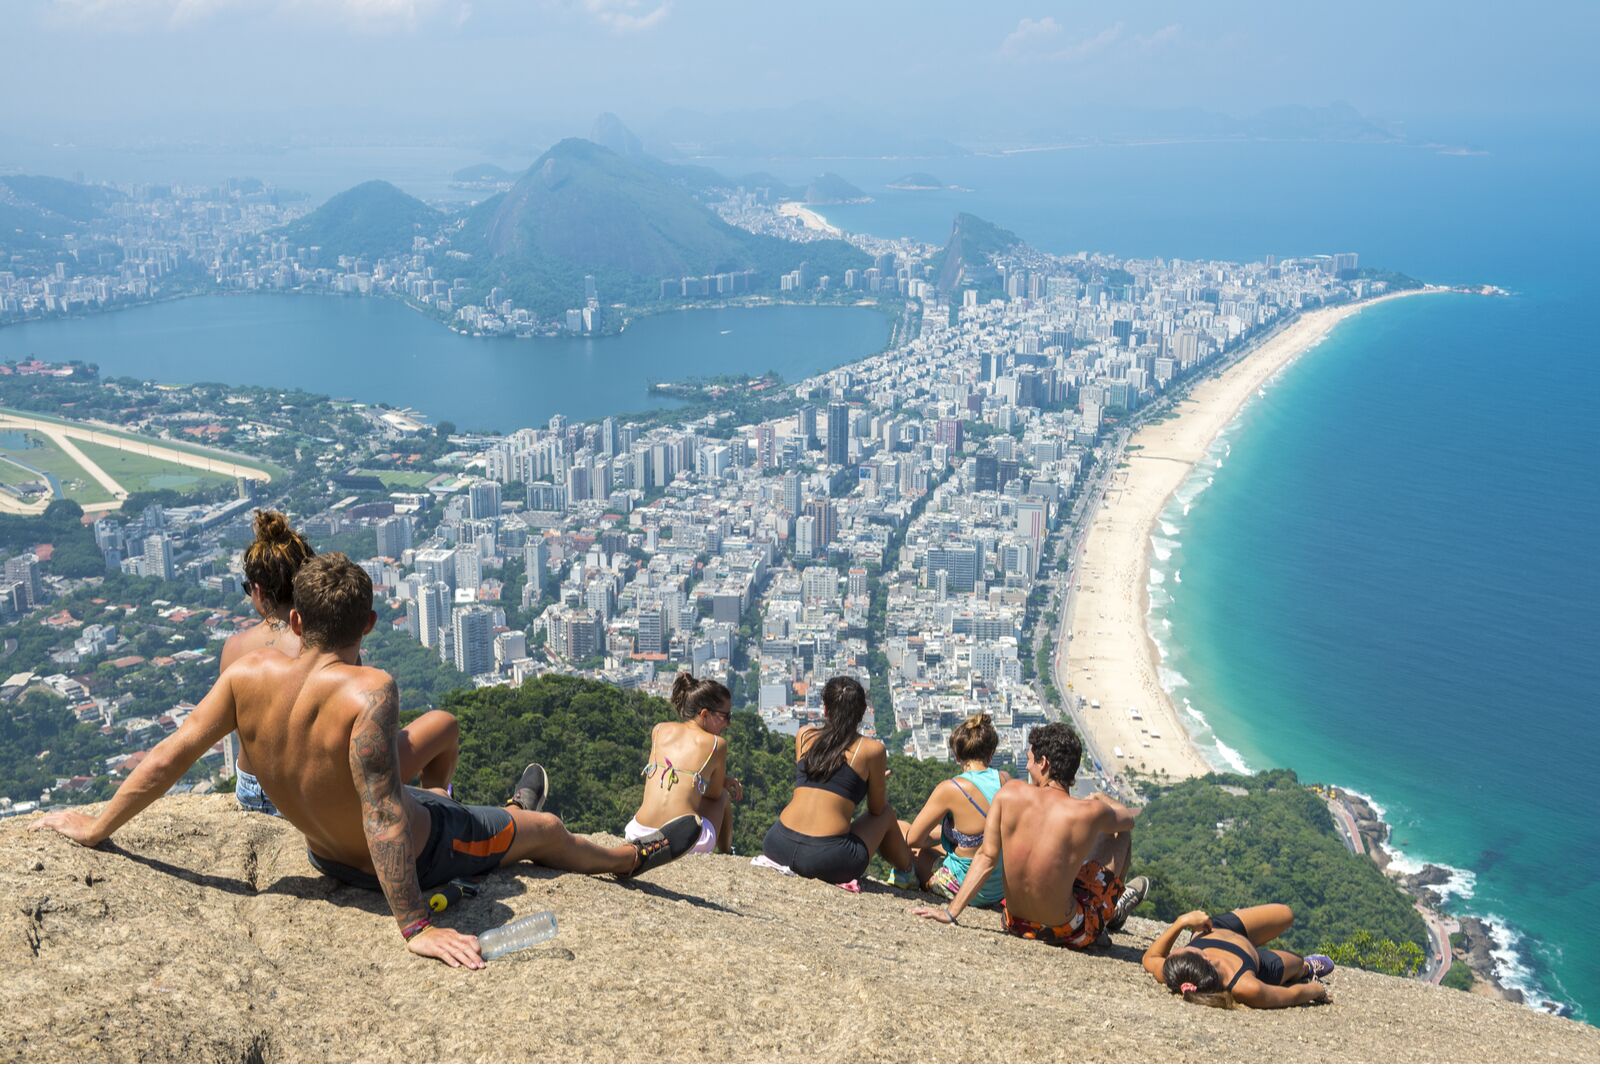 RIO DE JANEIRO hikes - people at the top of two brothers mountain